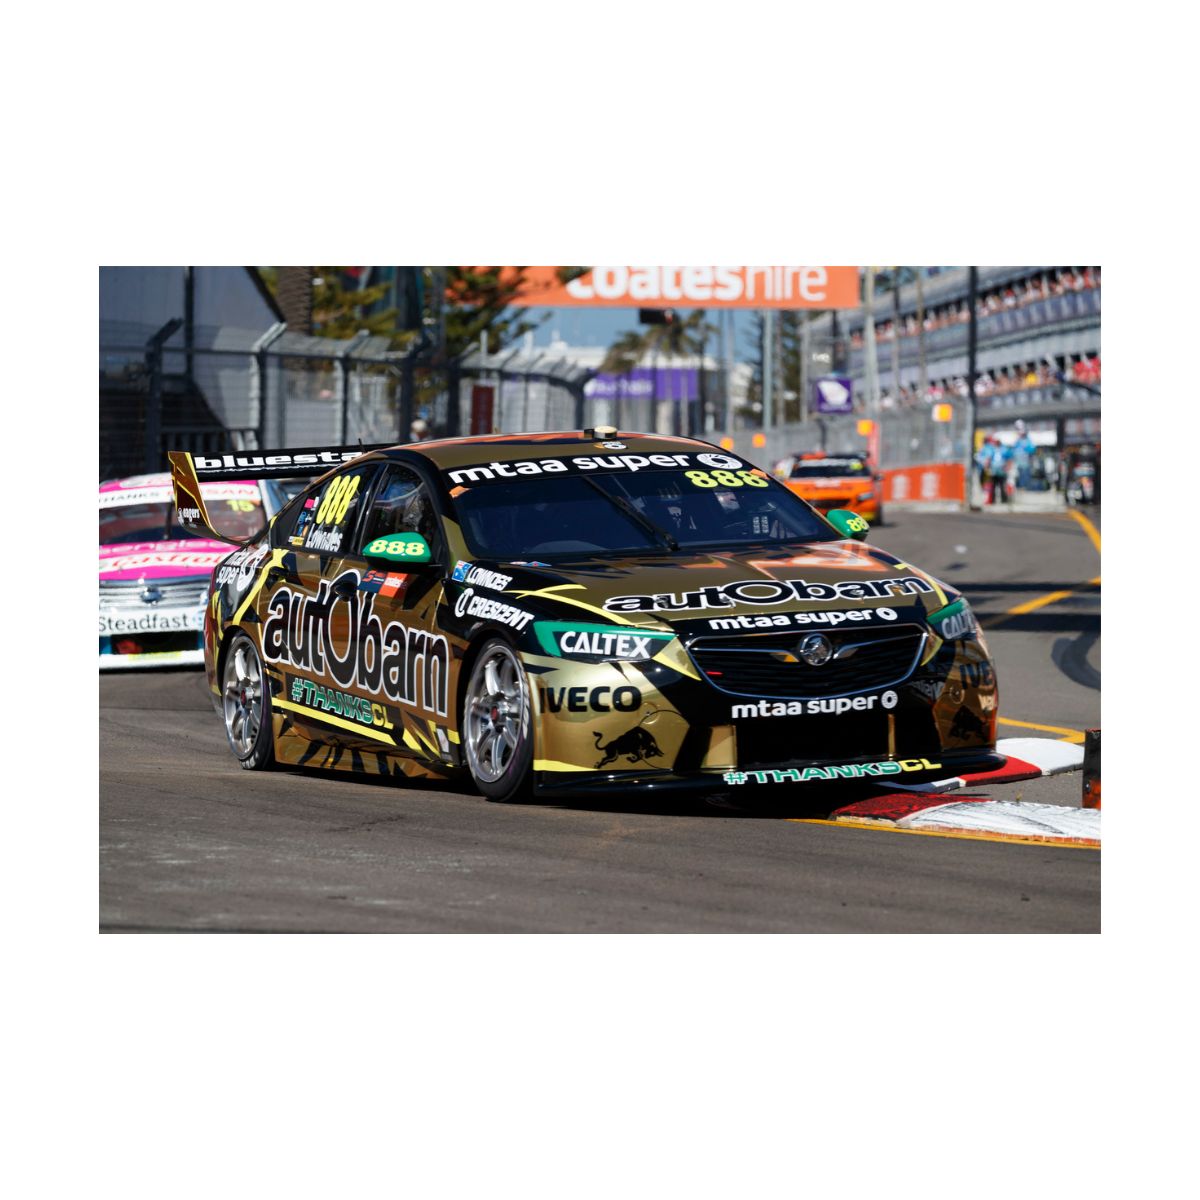 Holden ZB Commodore Autobarn Lowndes Racing #888 - Lowndes - 2018 Newcastle 500  "Lowndes Final Race"